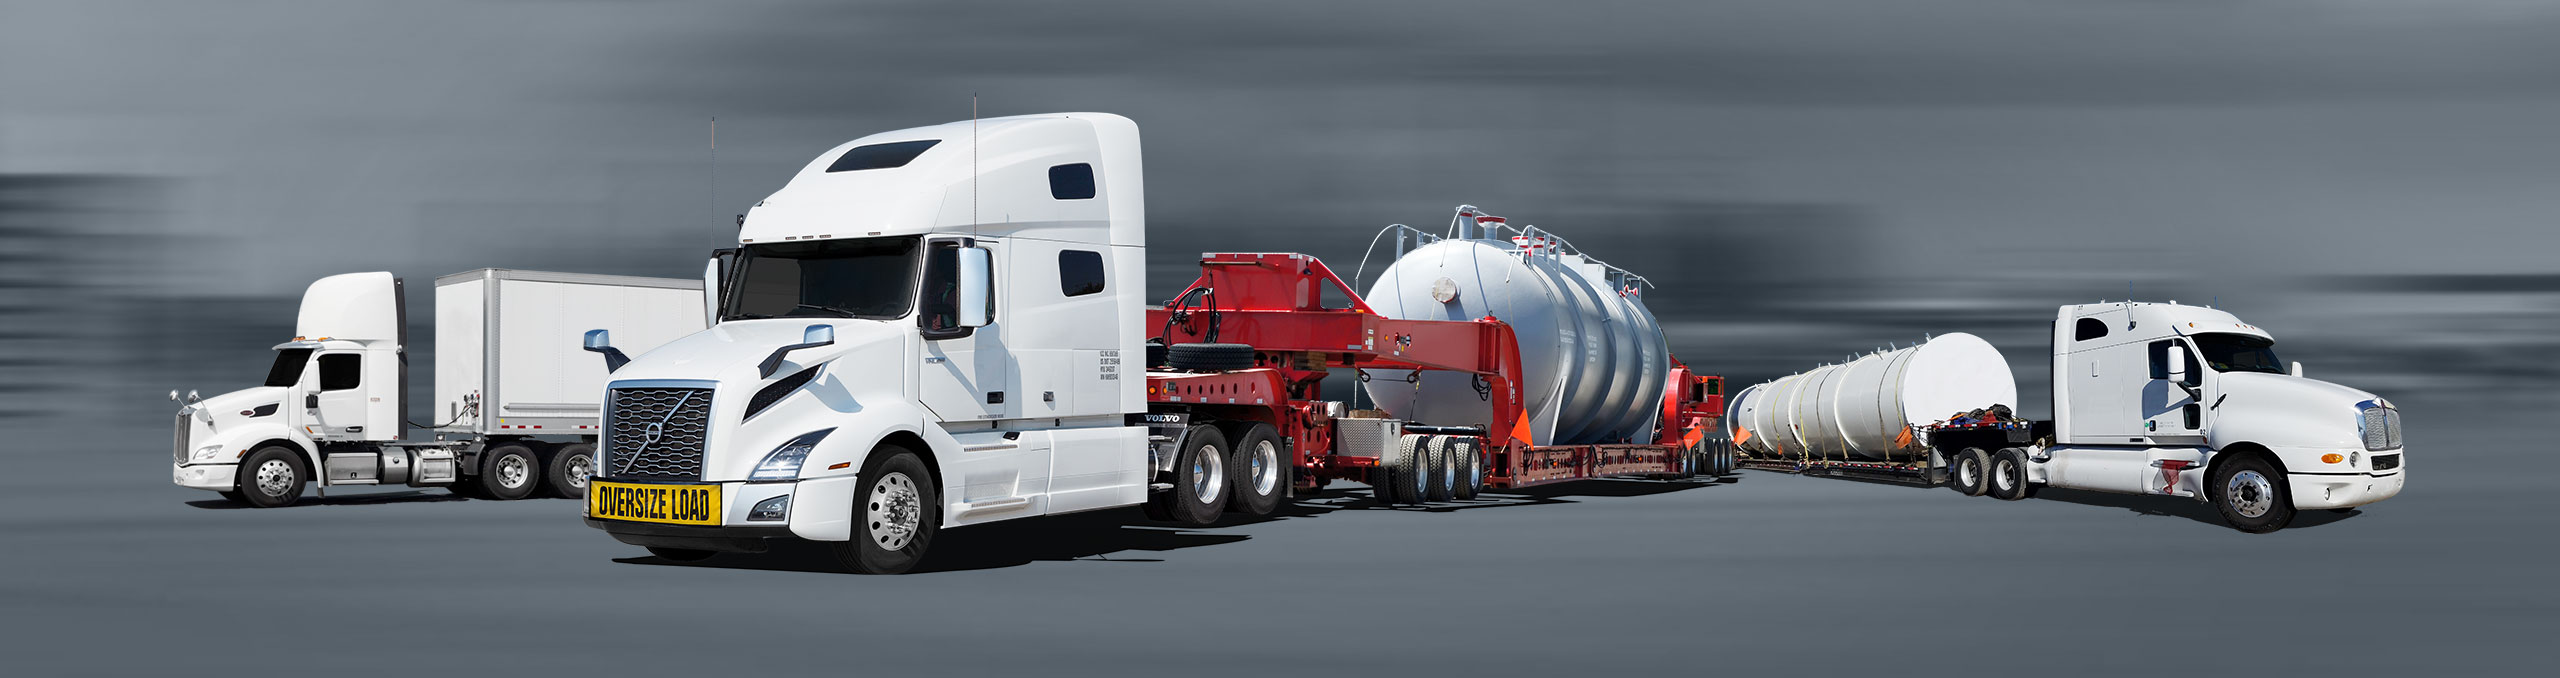 Transport trucks with dry van and flatbed trailers